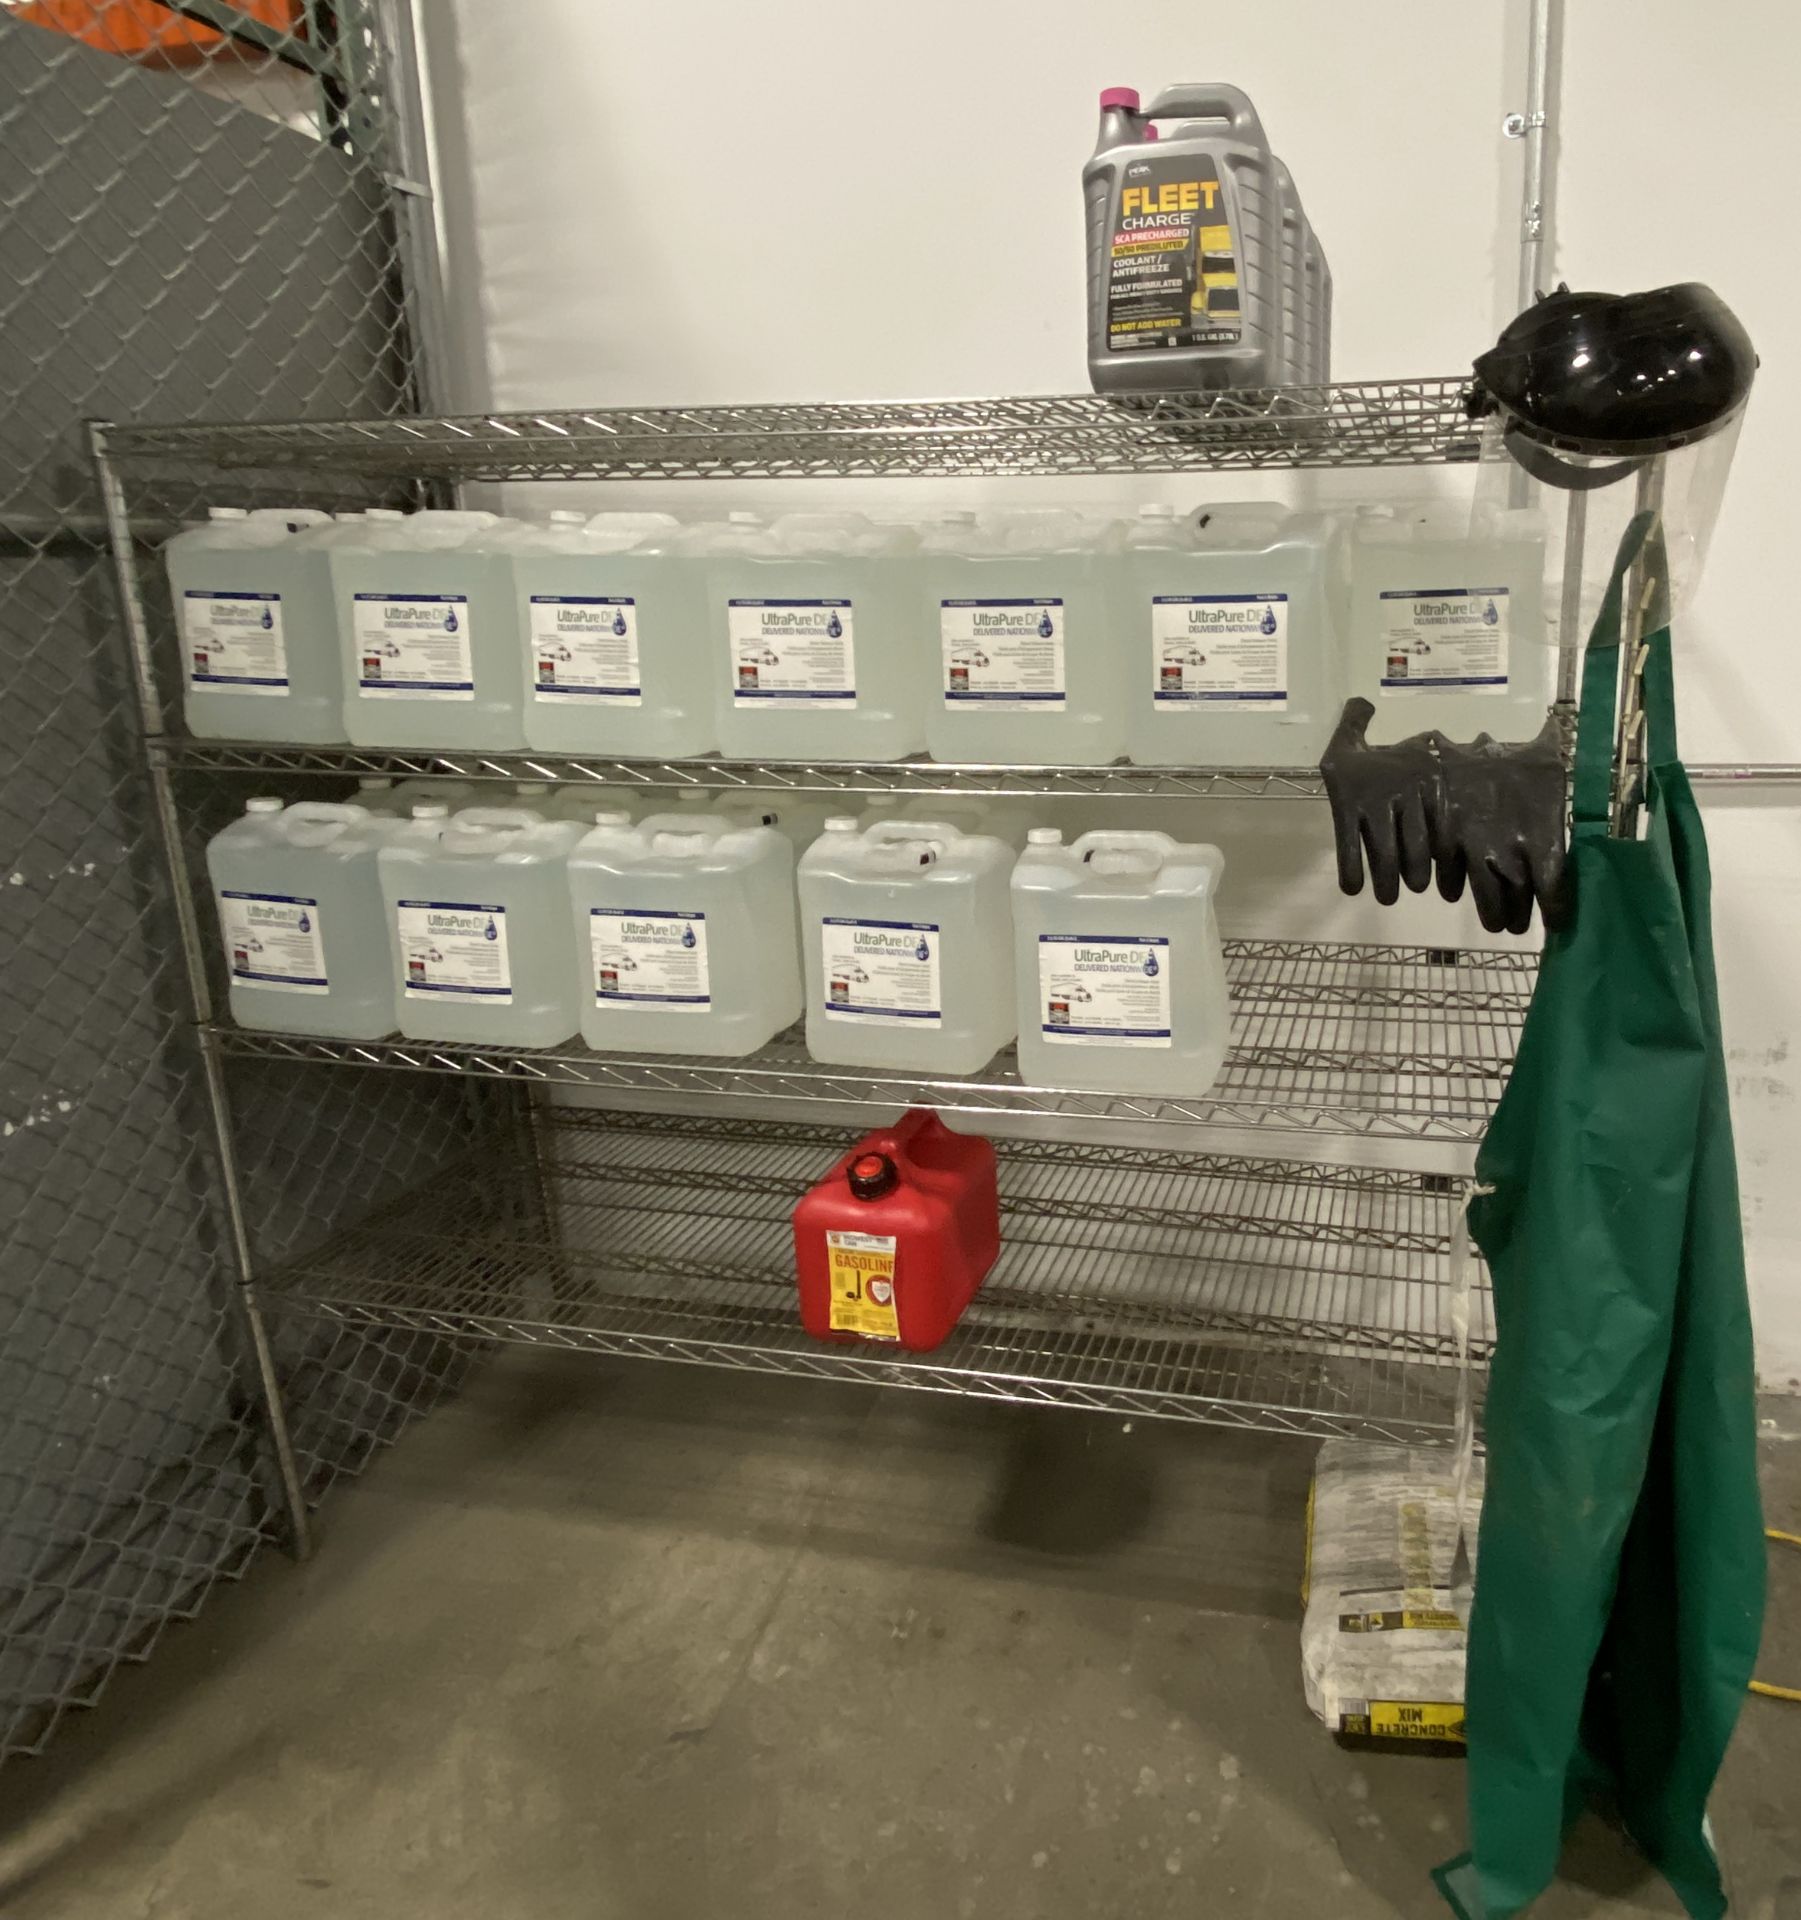 6' X 24" X 4 tier Metro rack with contens including (6) gallons of commercial truck antifreeze, (33)